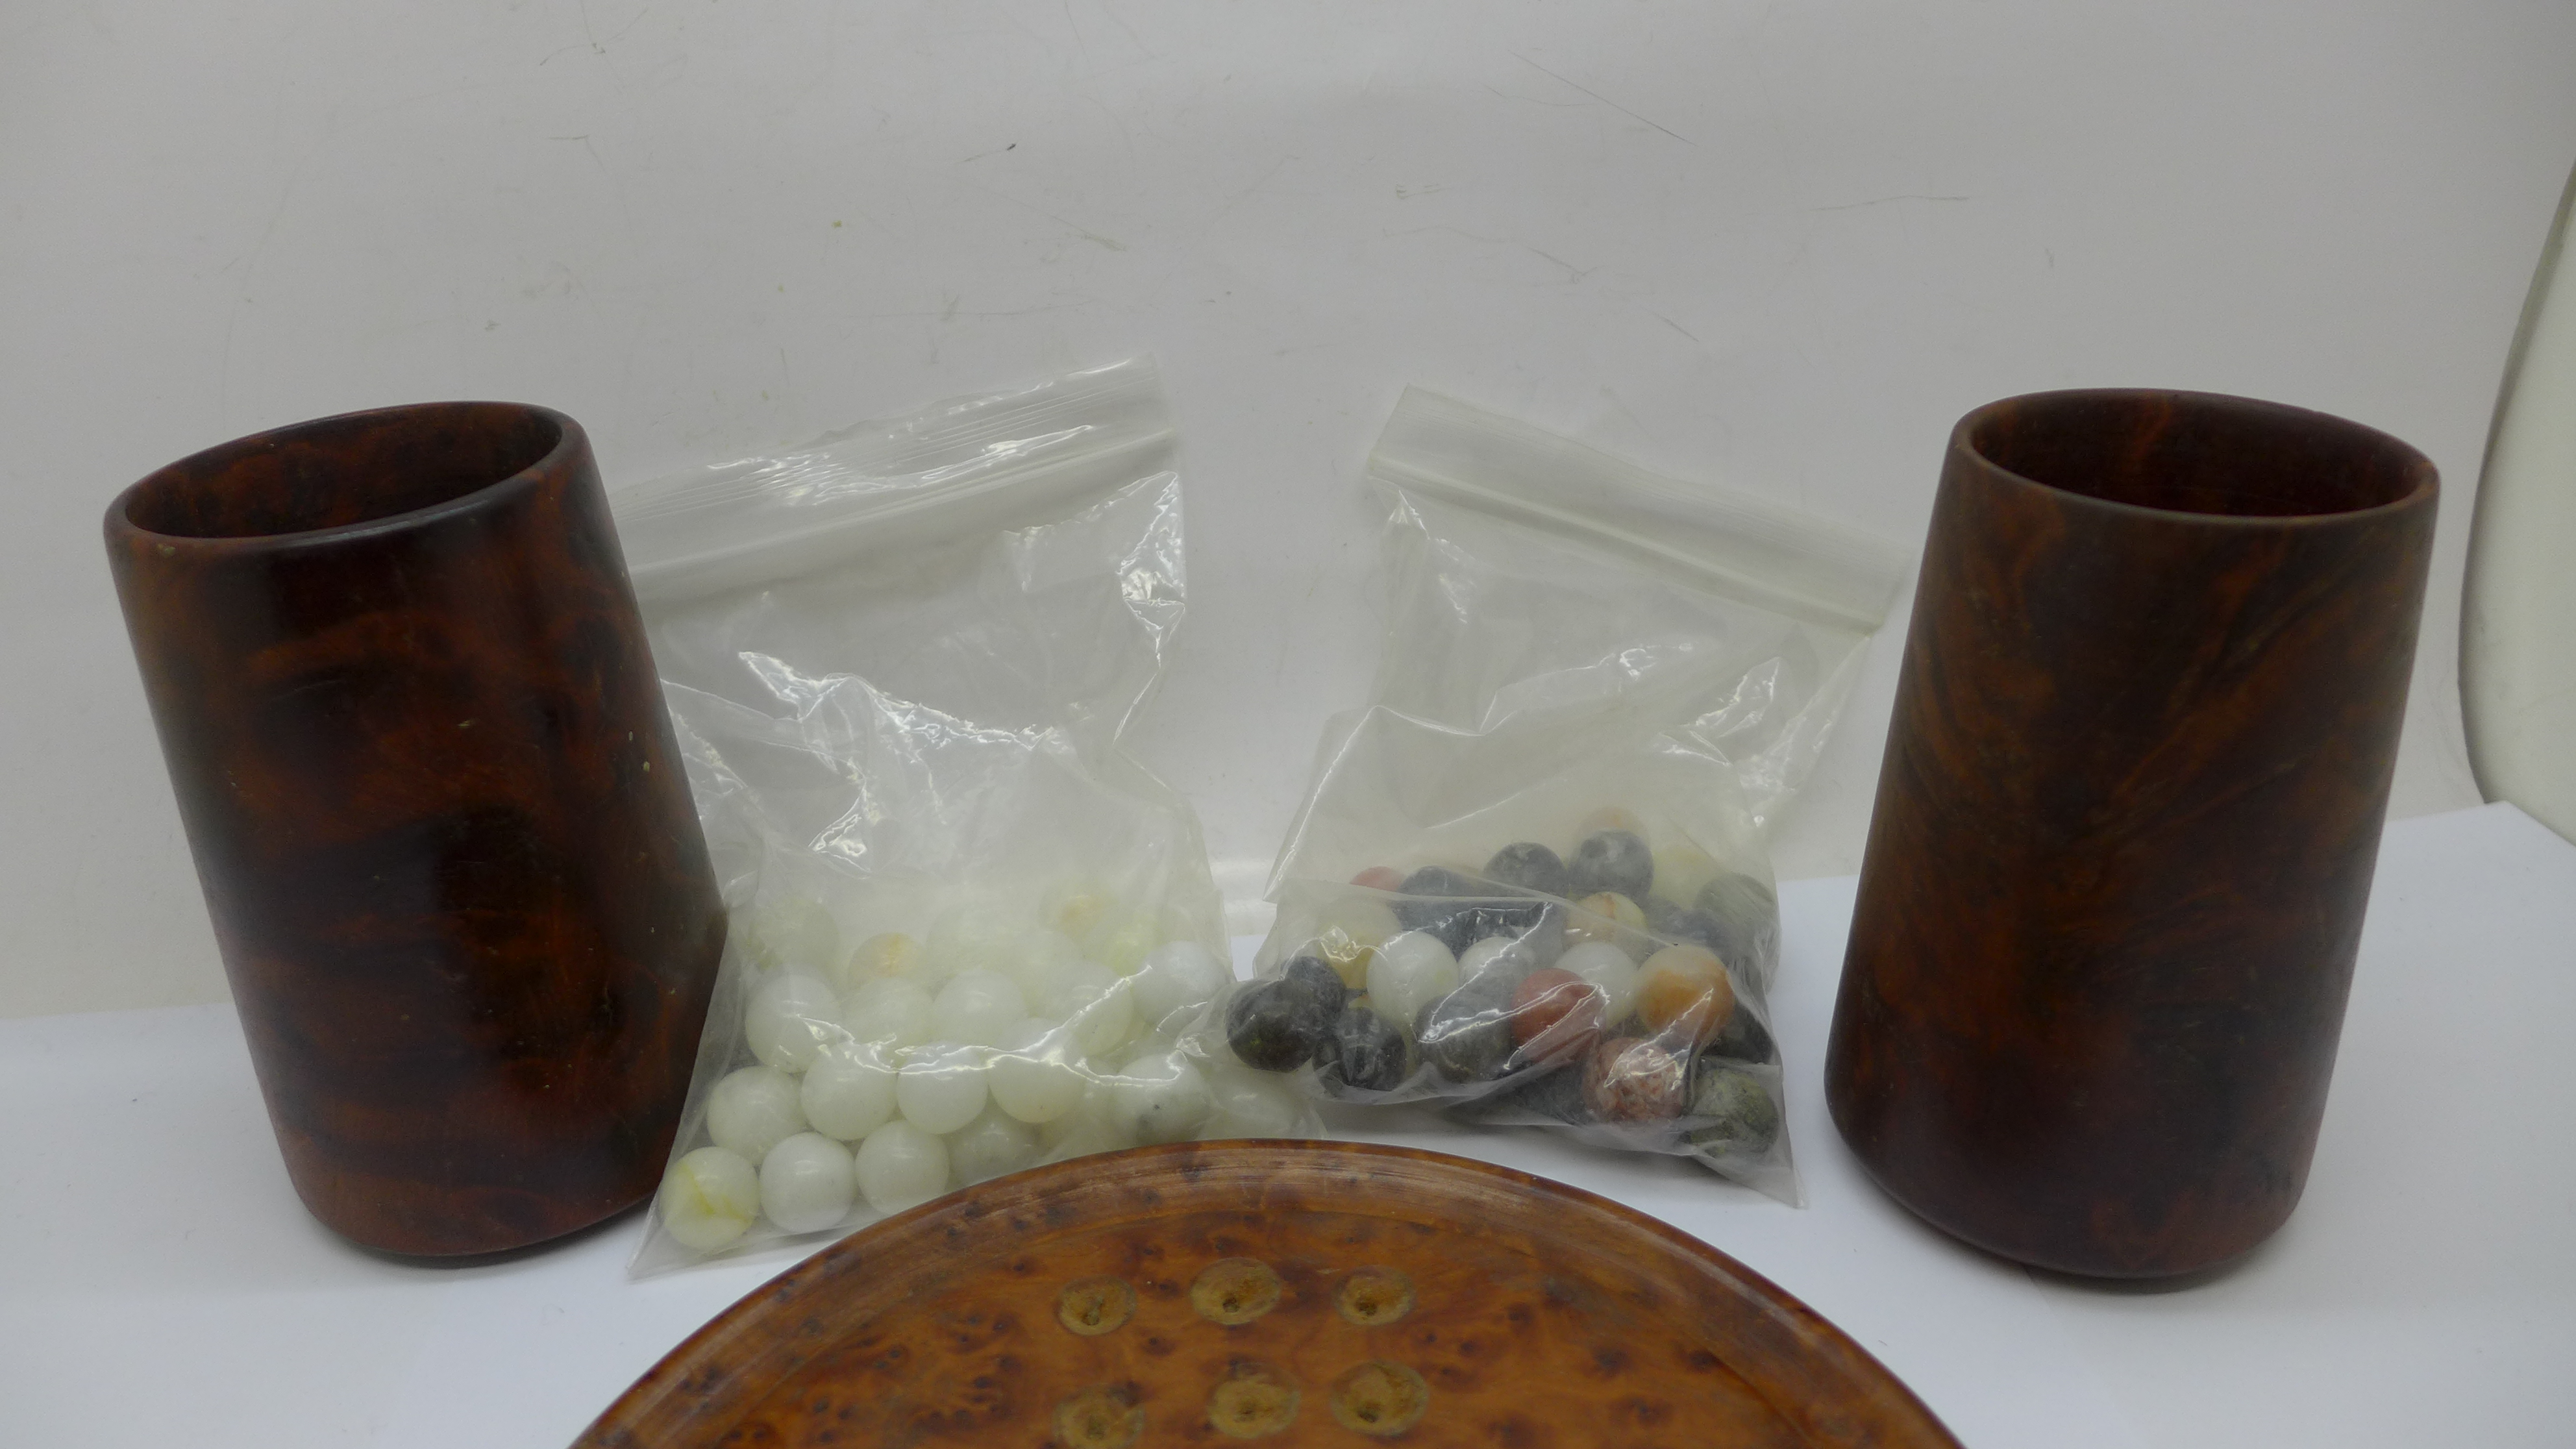 A thuya wood solitaire set with two sets of natural stone marbles and two dice cups - Image 2 of 2